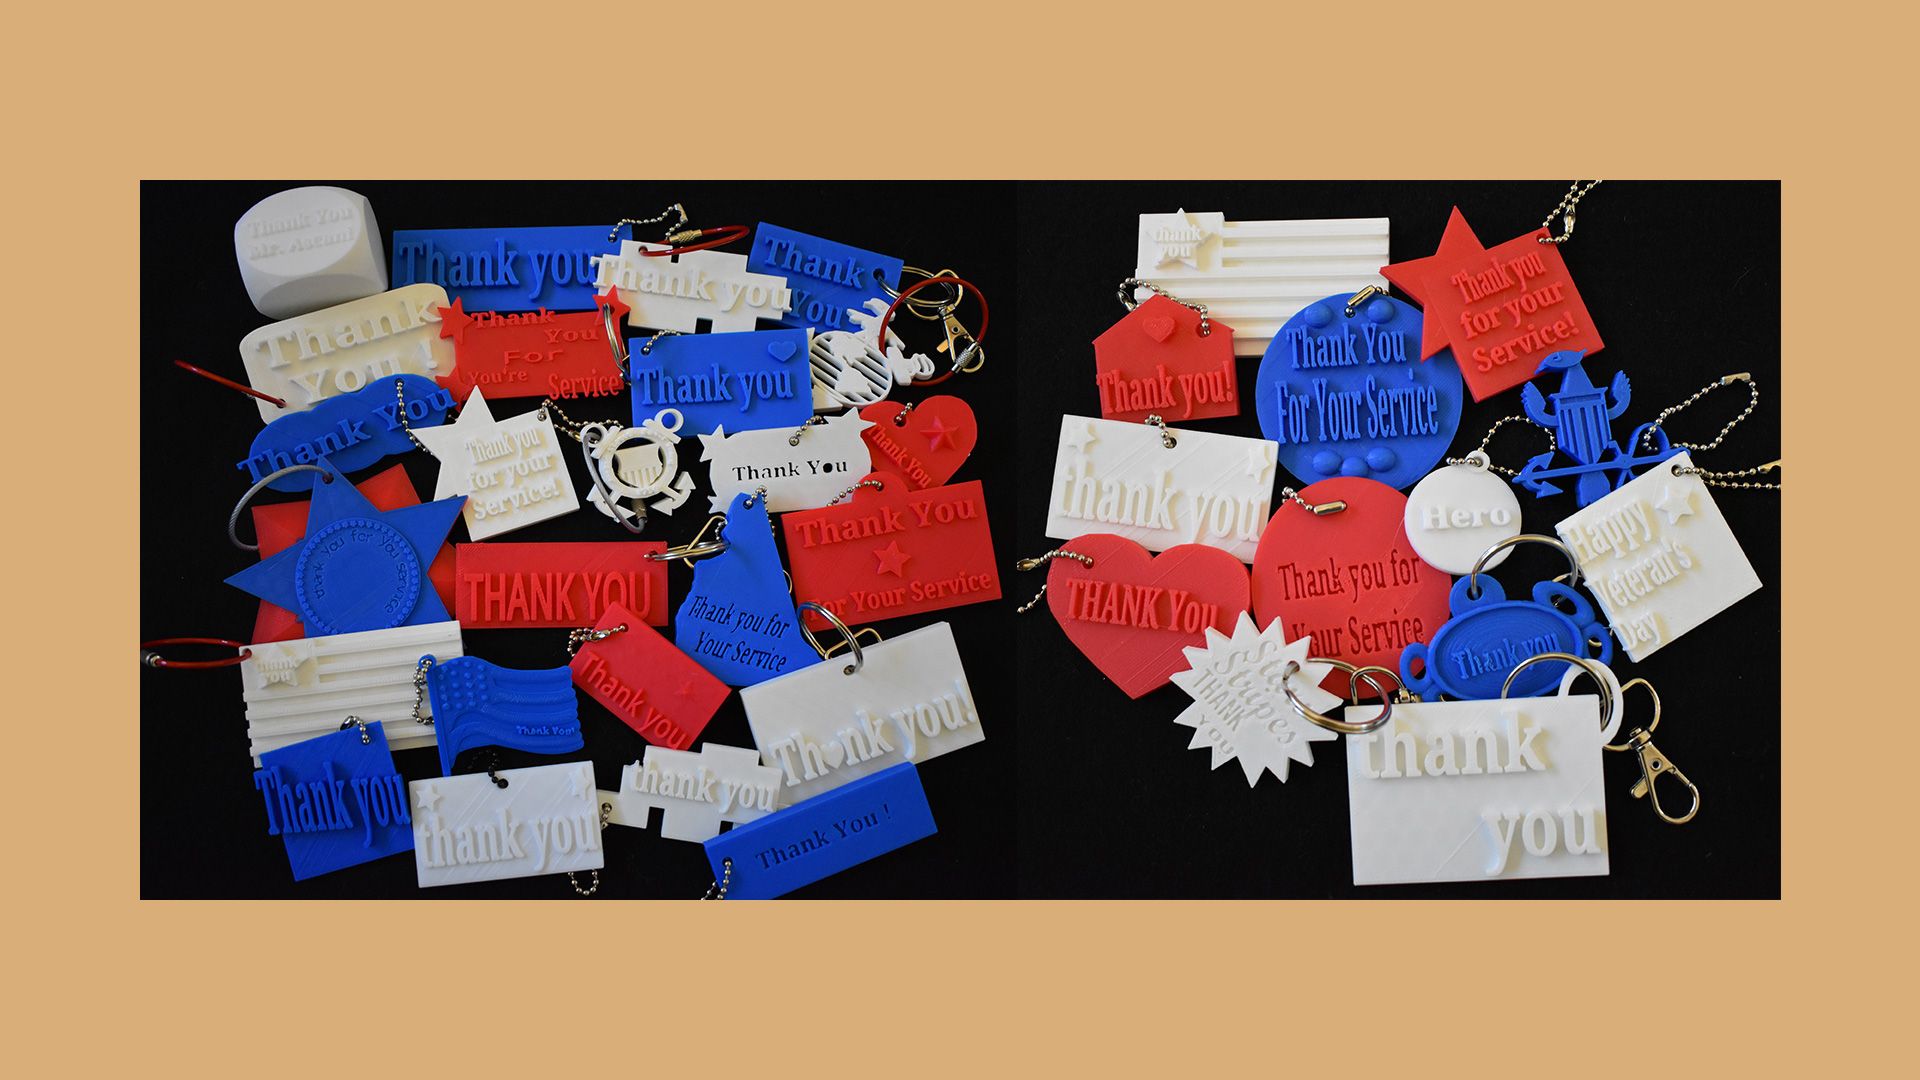 A range of 3D printed keychains for veterans. Each with a thank you message.